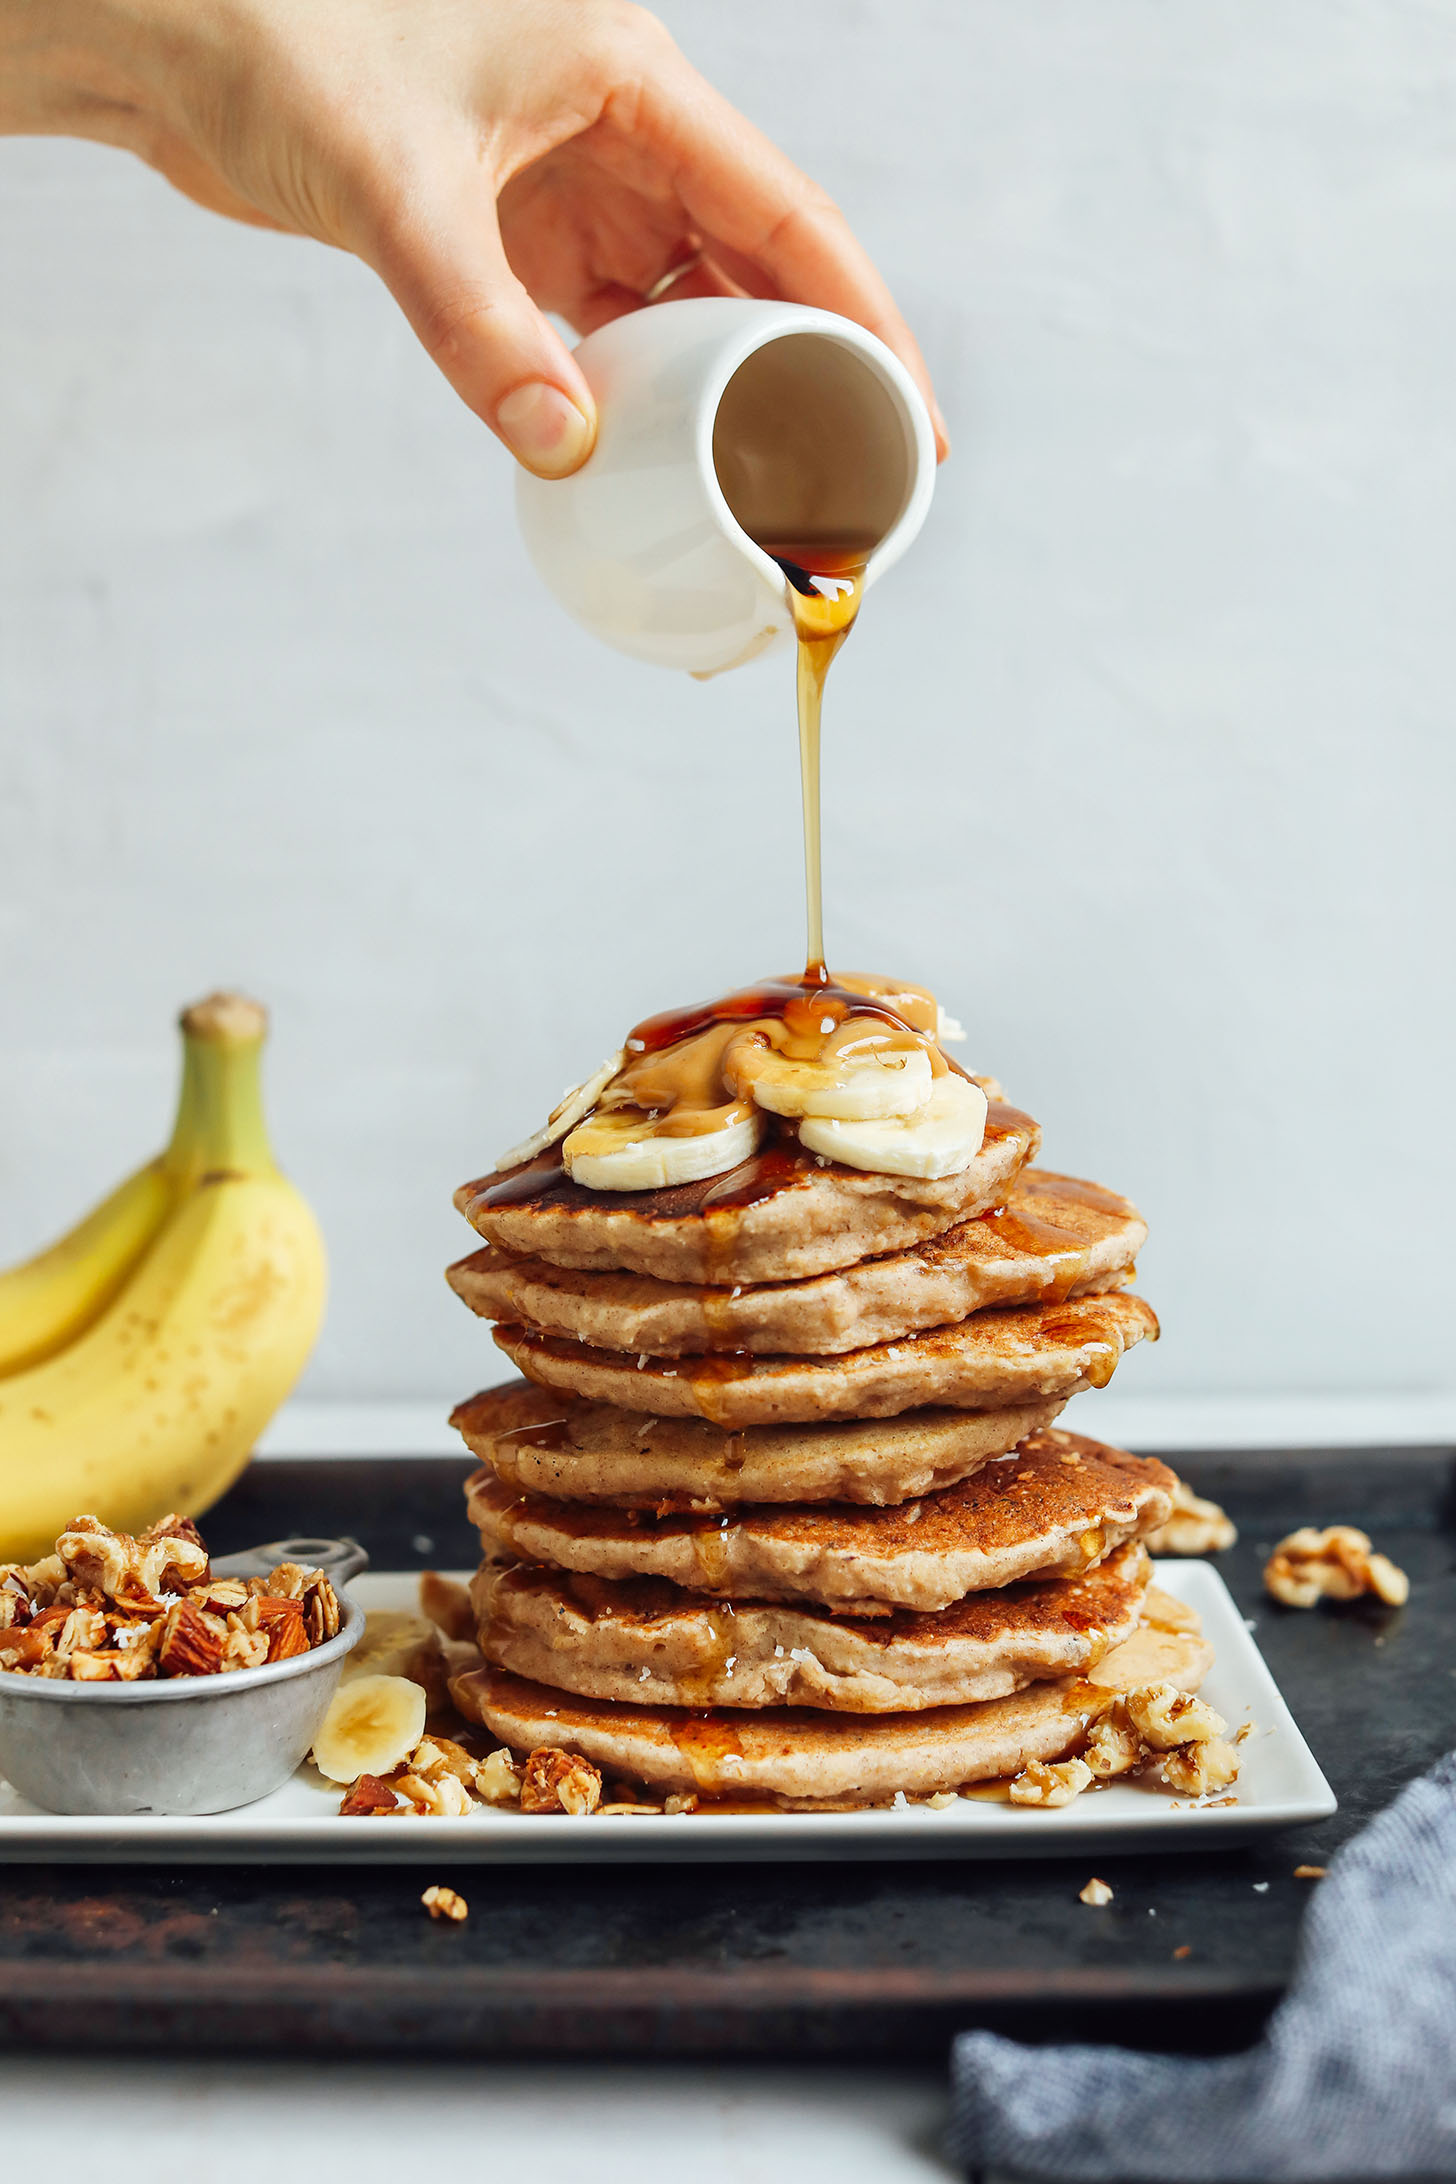 Drizzling syrup onto a stack of gluten-free vegan Banana Pancakes